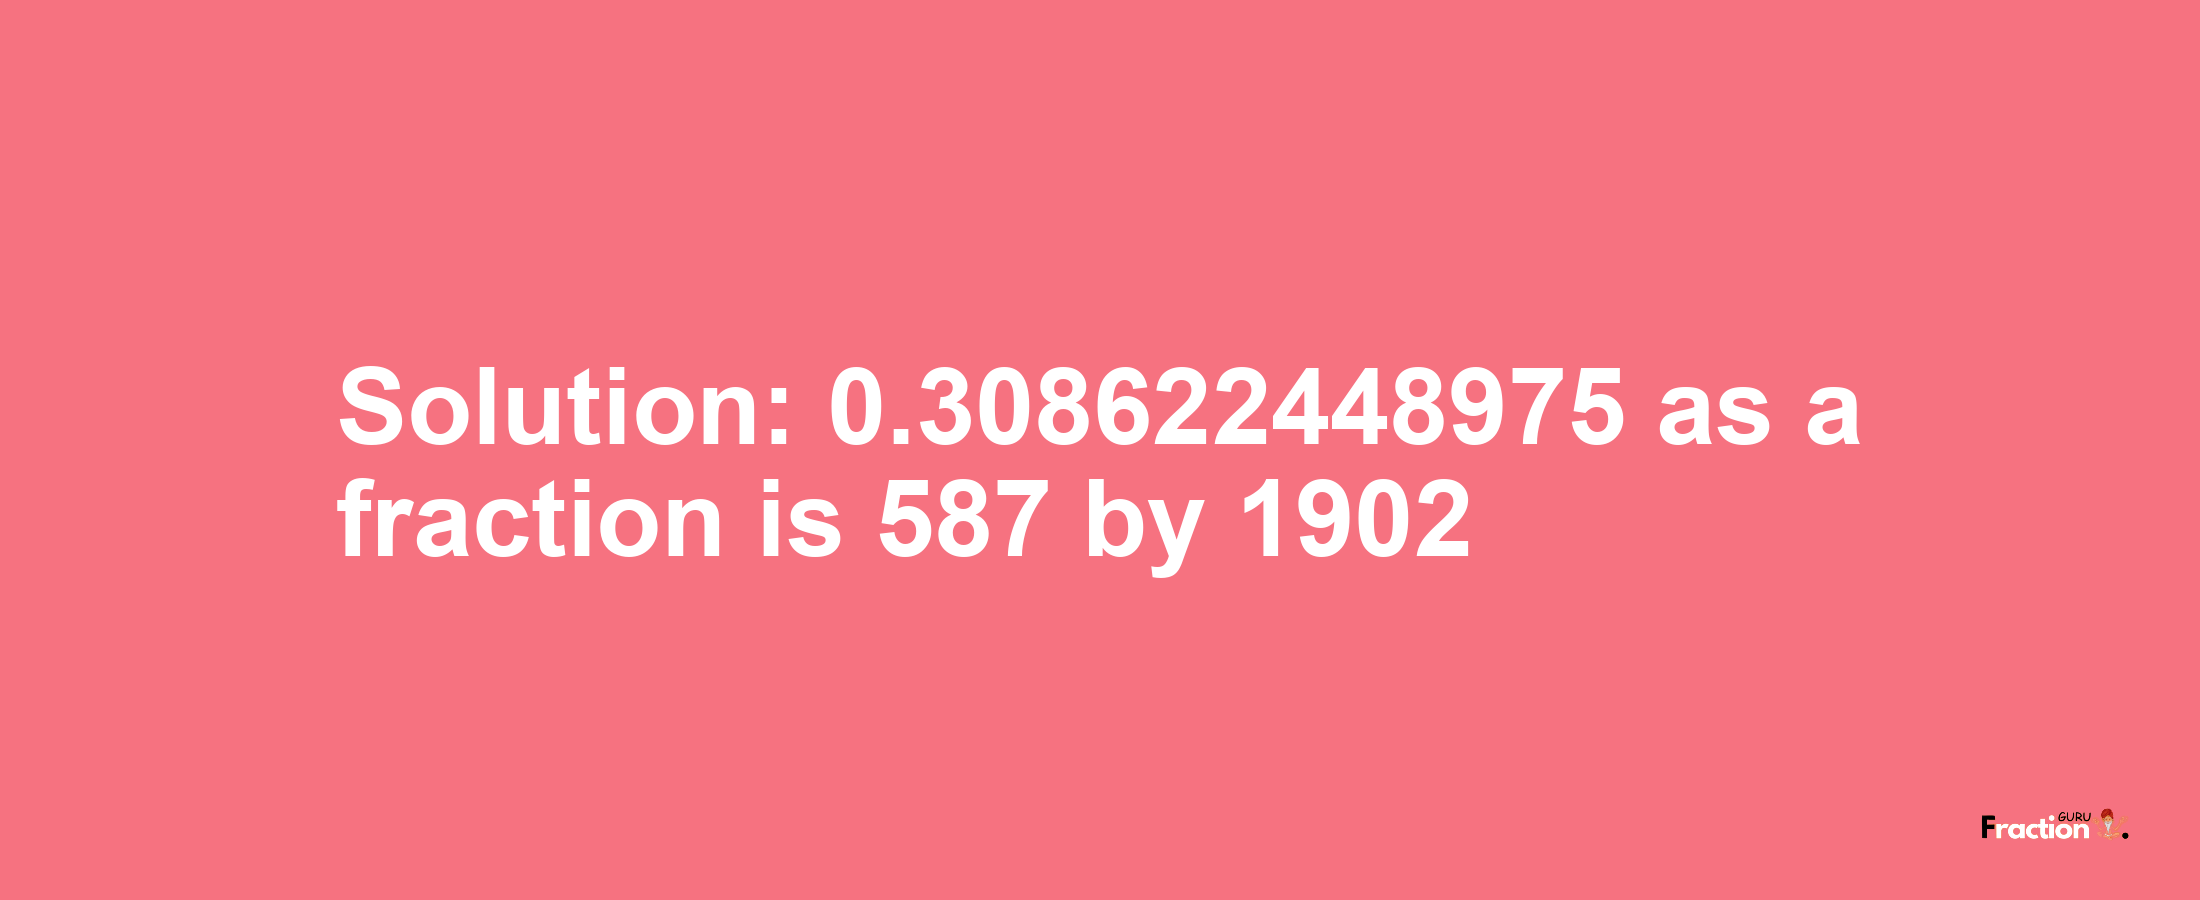 Solution:0.308622448975 as a fraction is 587/1902